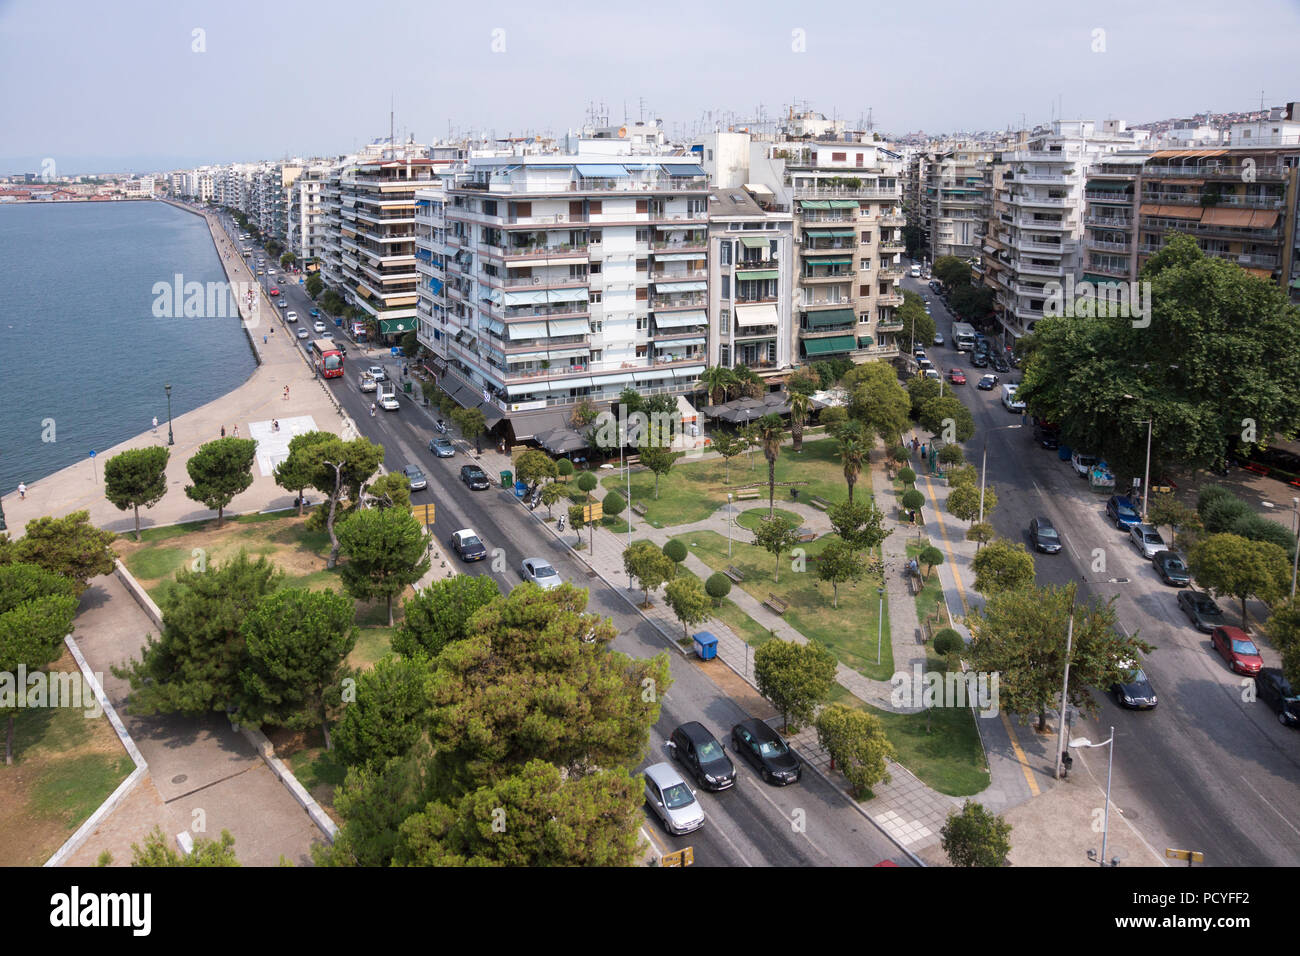 An aerial  view across Thessaloniki waterfront and city taken from the White Tower of Thessaloniki Stock Photo